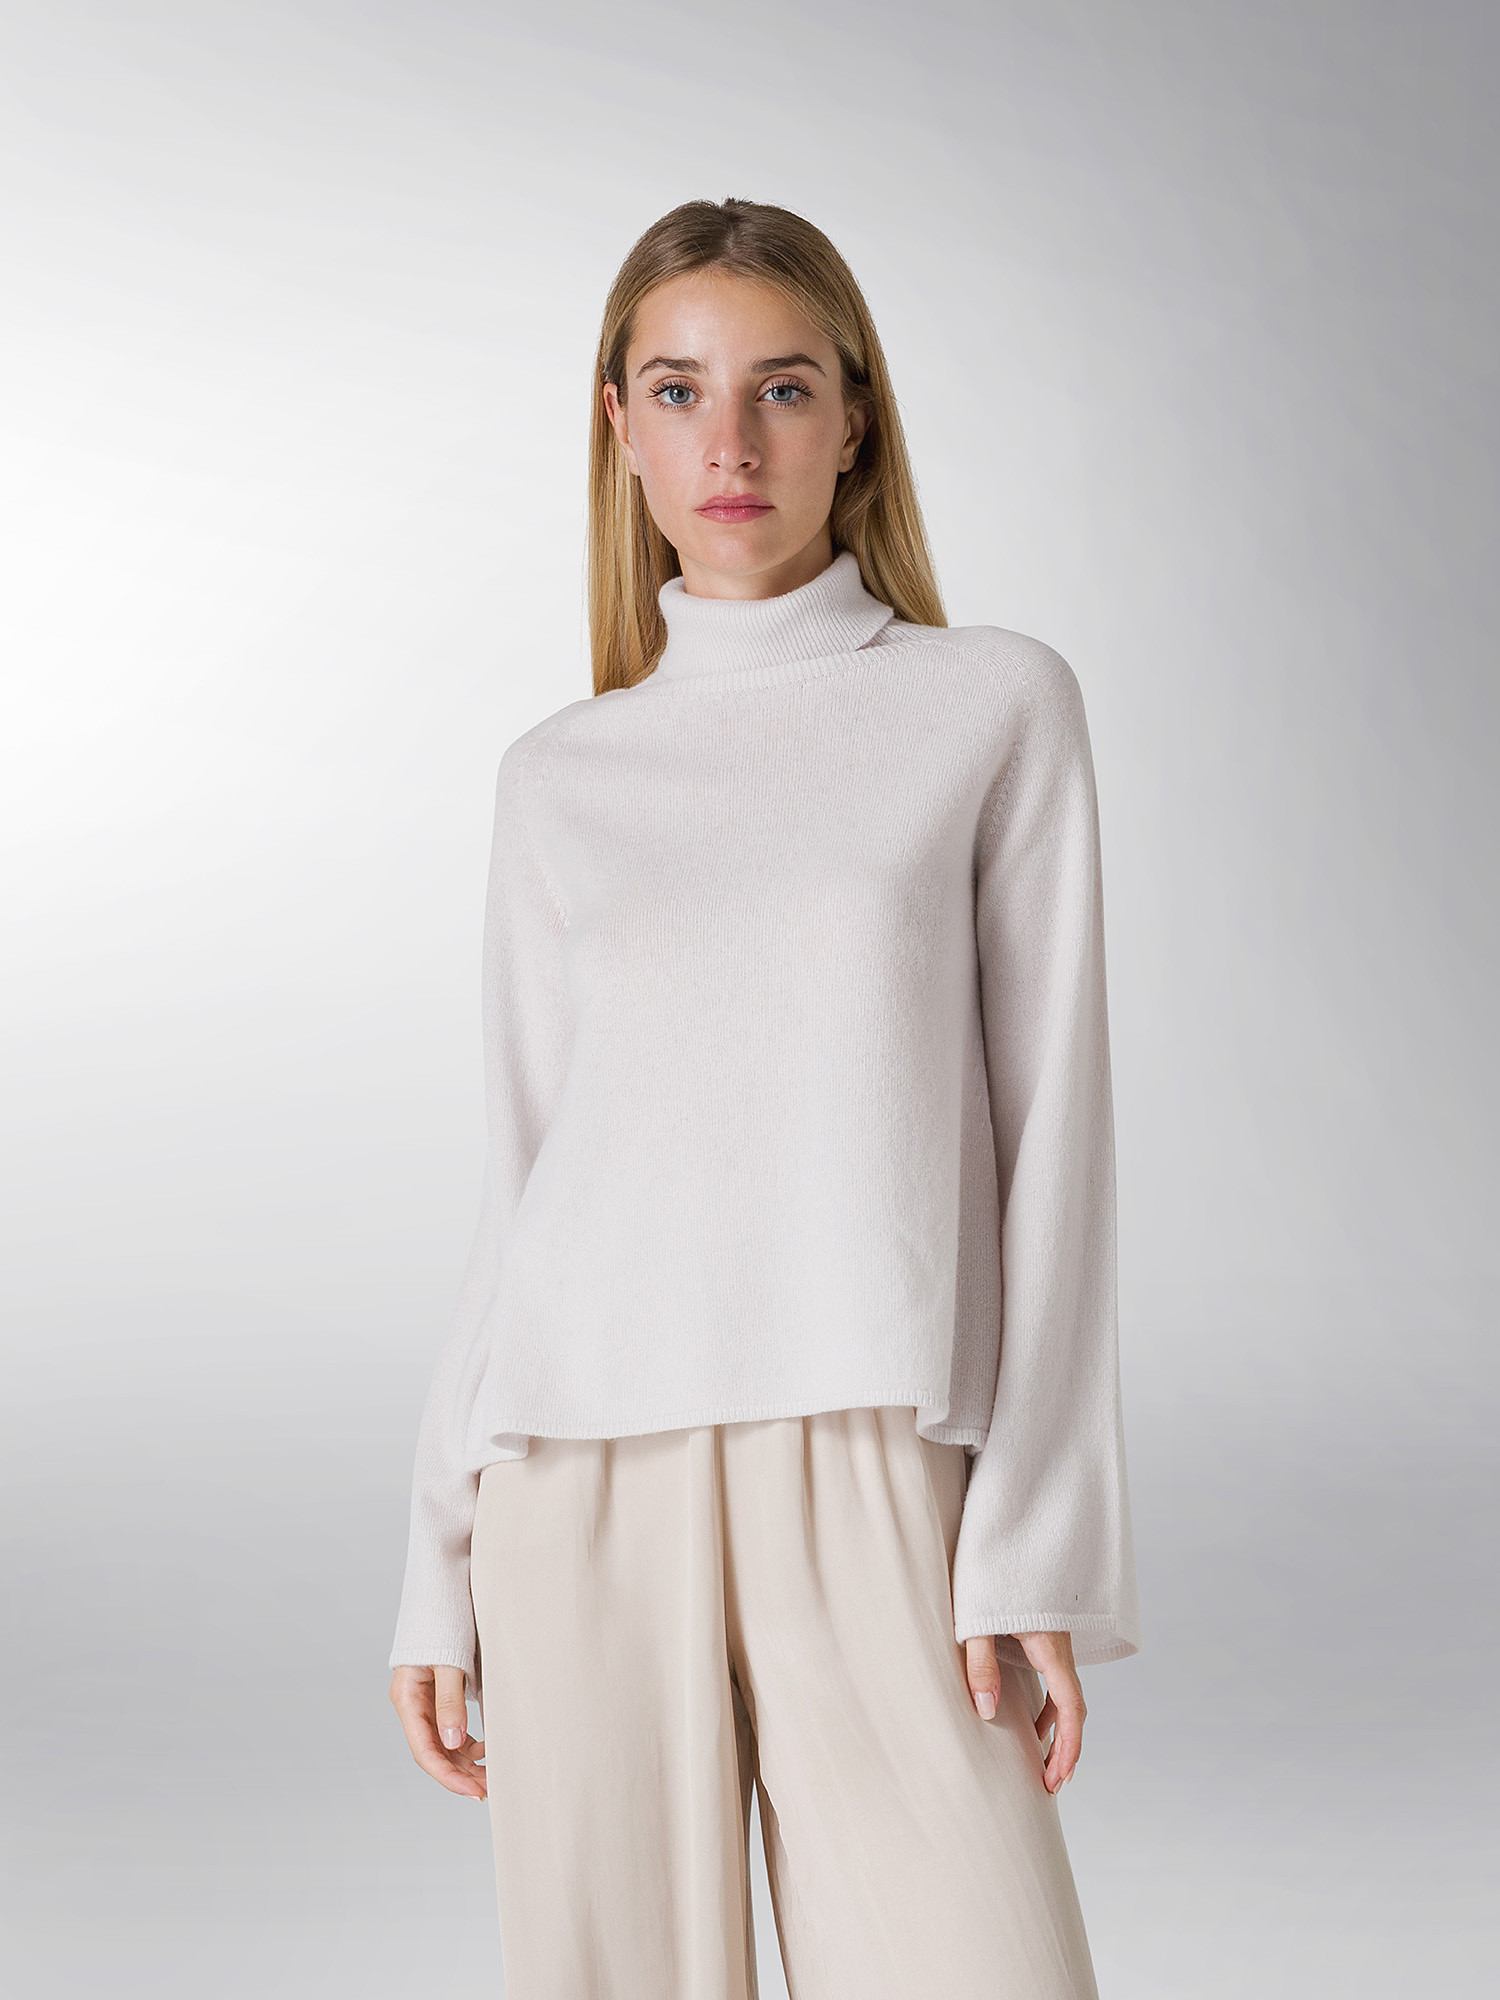 Coin Cashmere - Dolcevita in puro cashmere premium, Bianco, large image number 1